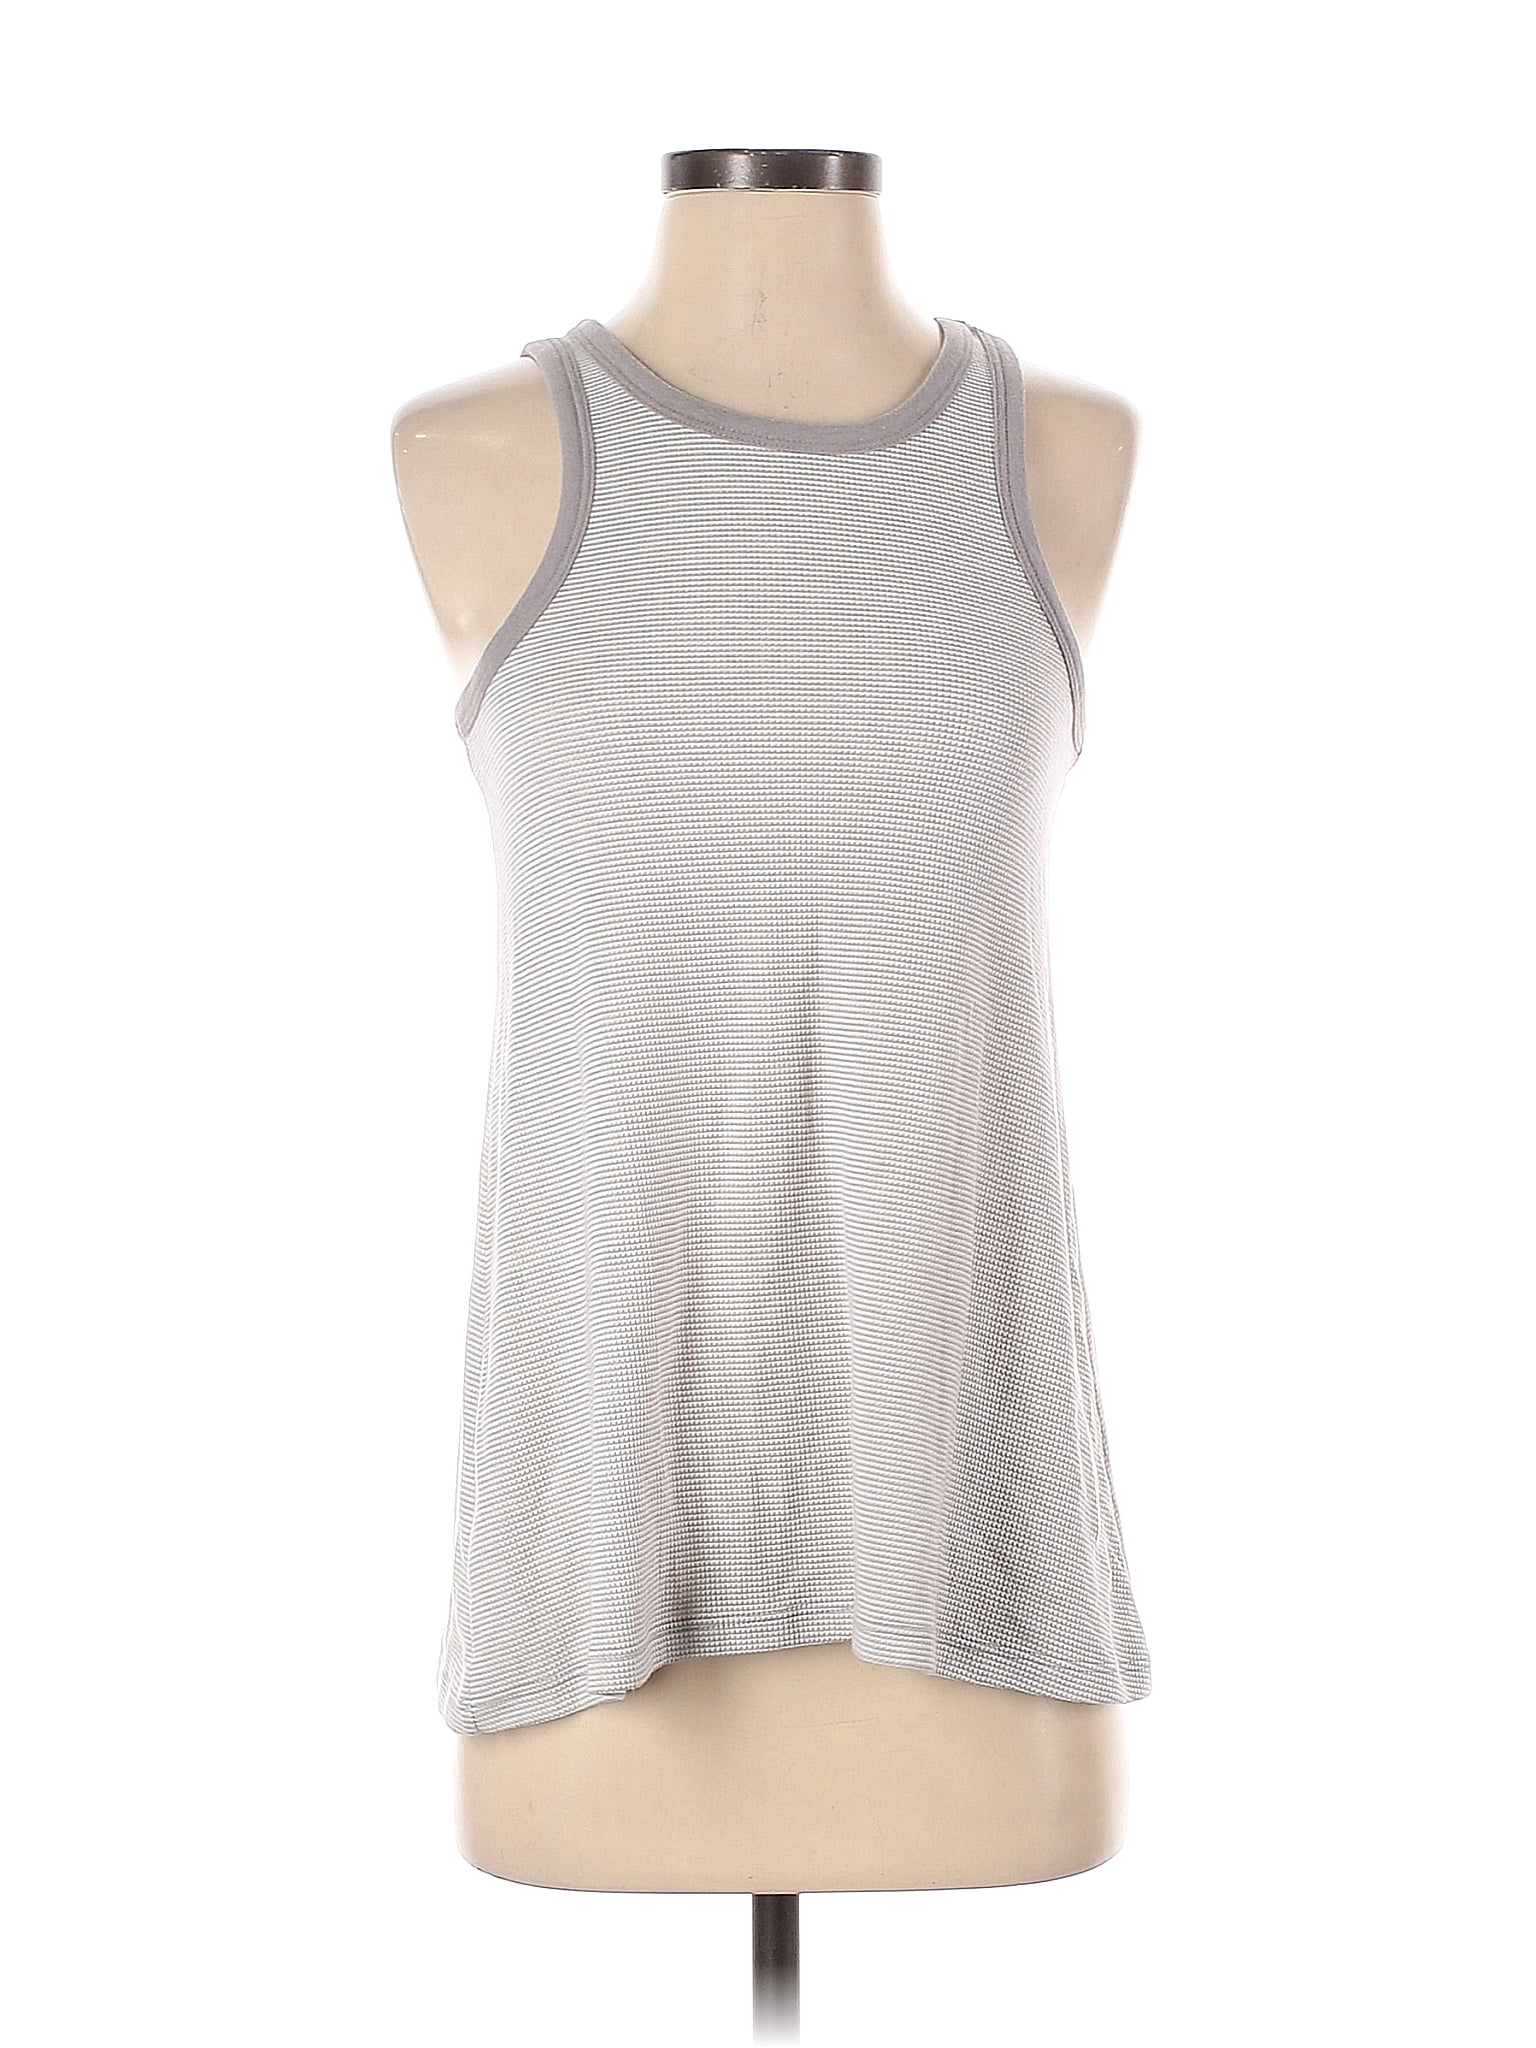 Yummie by Heather Thomson Color Block Stripes Gray Silver Tank Top